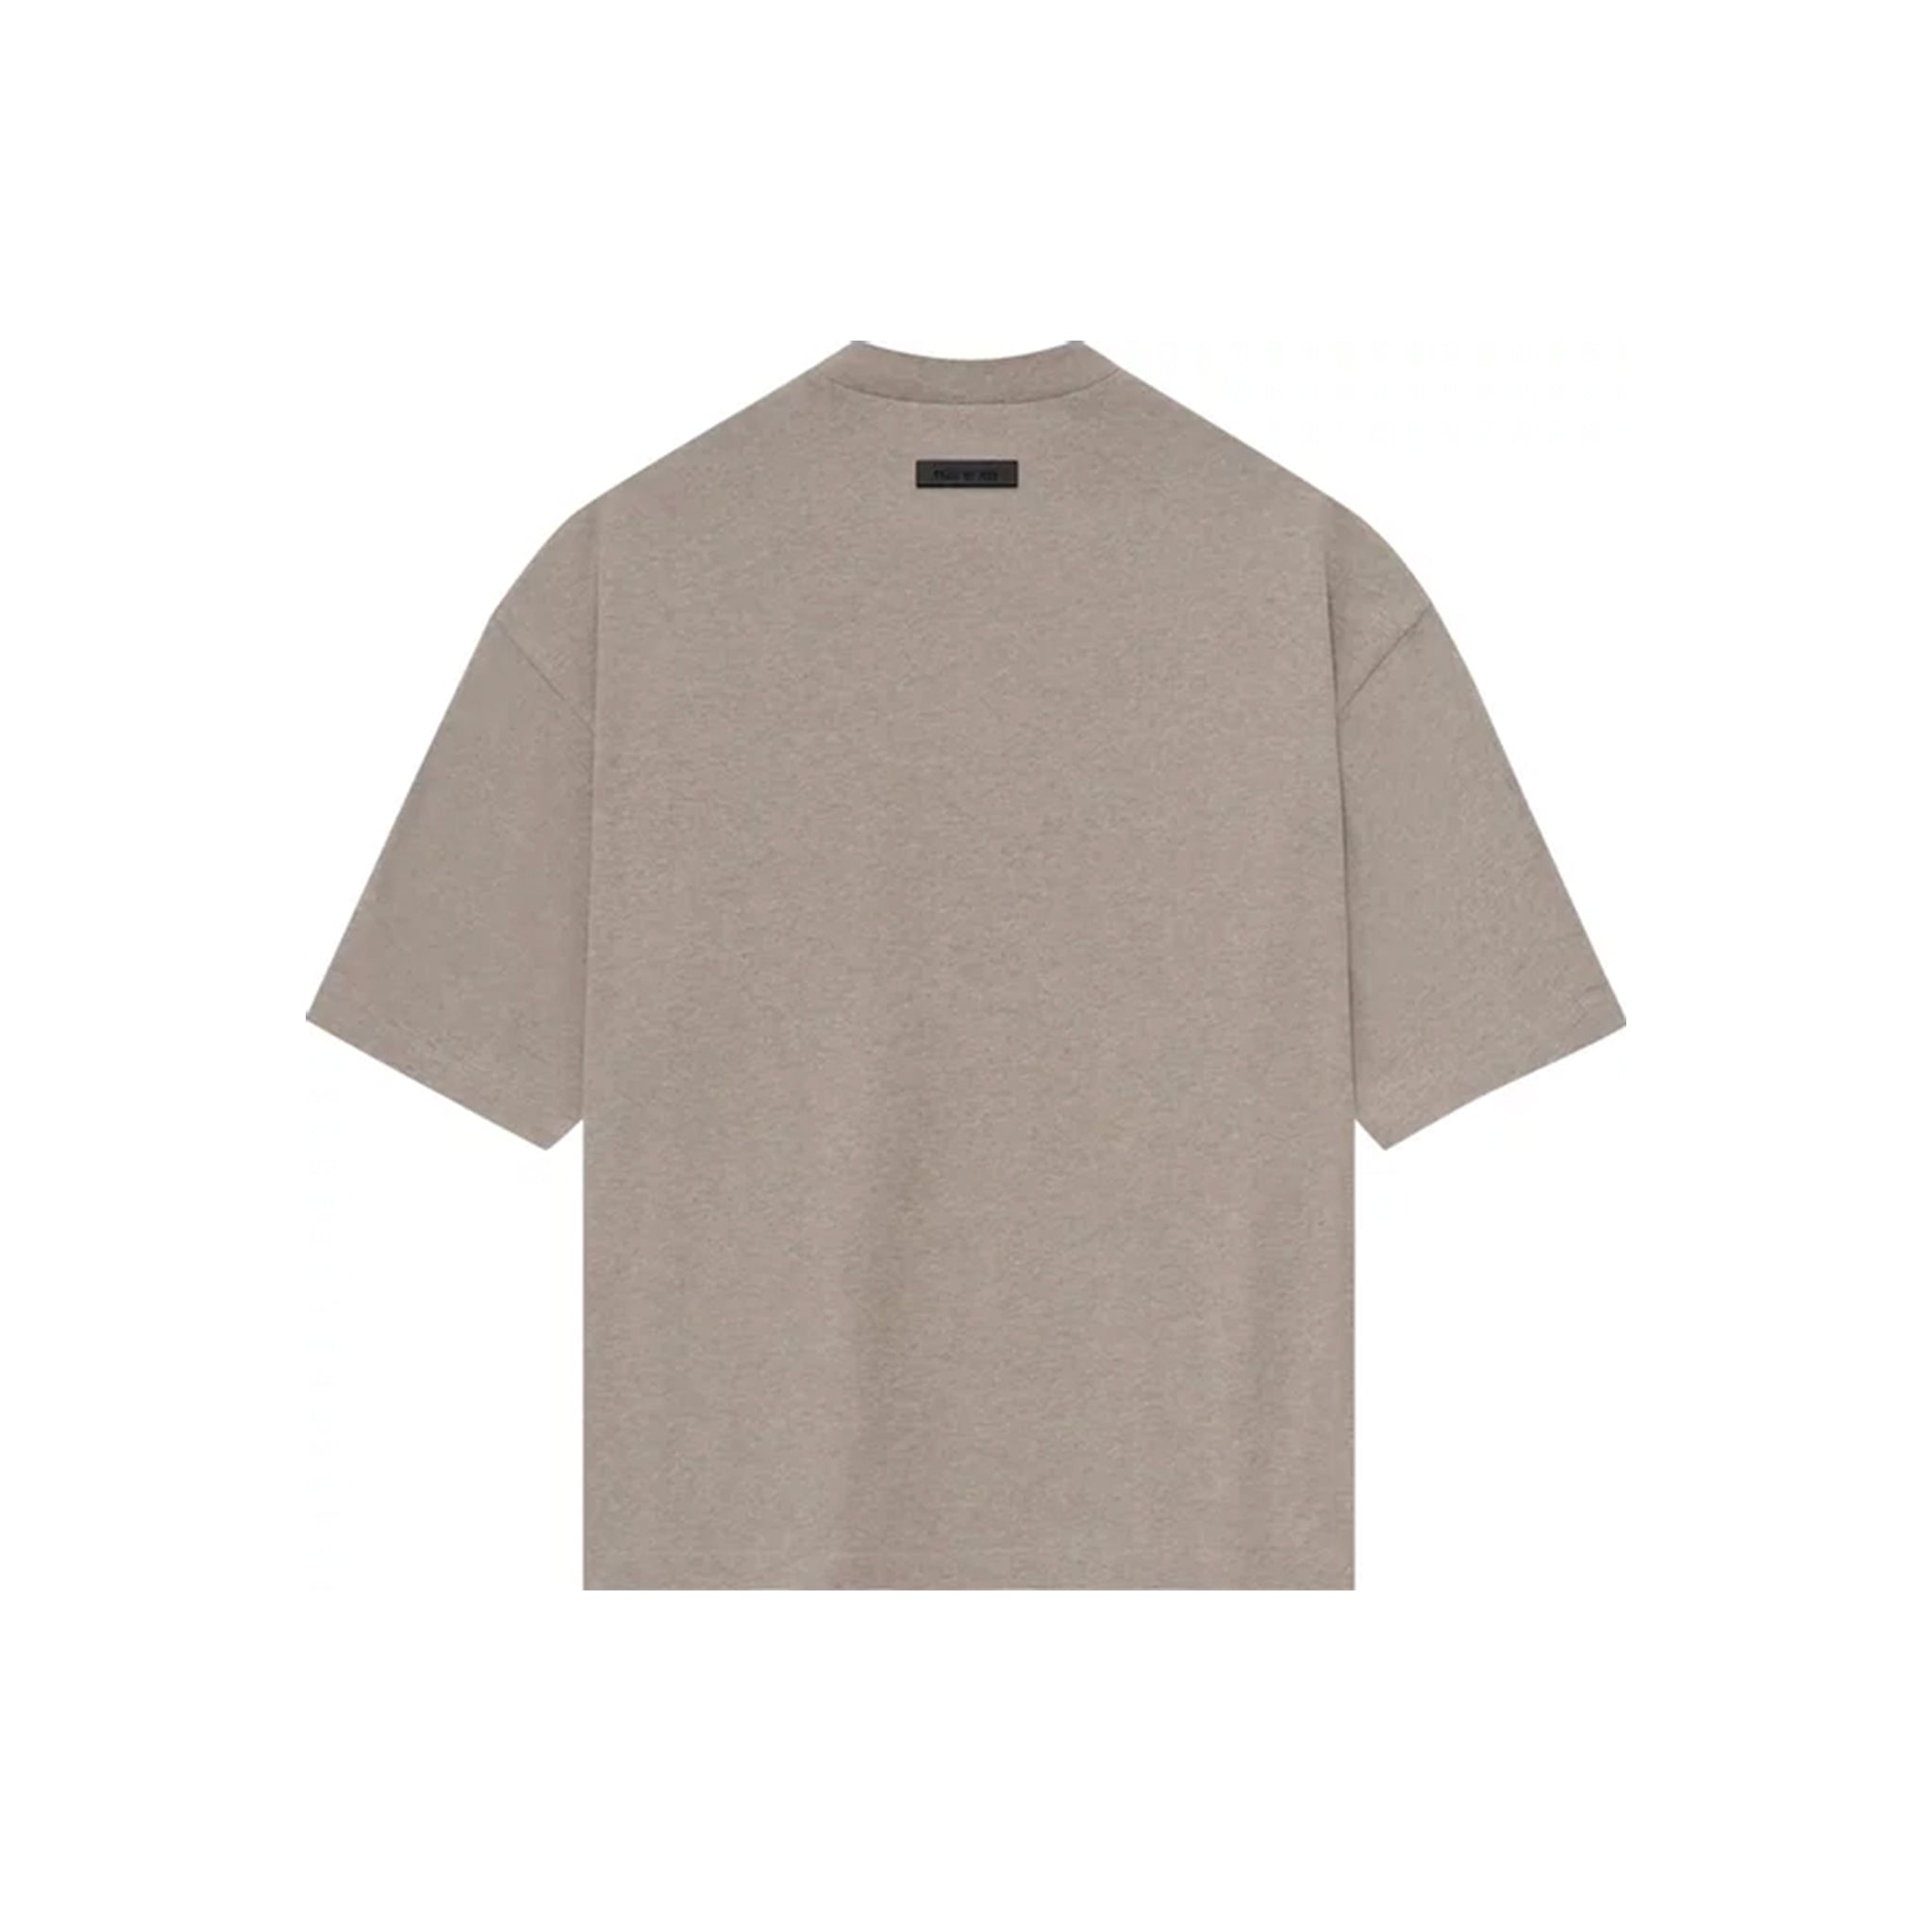 Fear of God Essentials – Common Hype